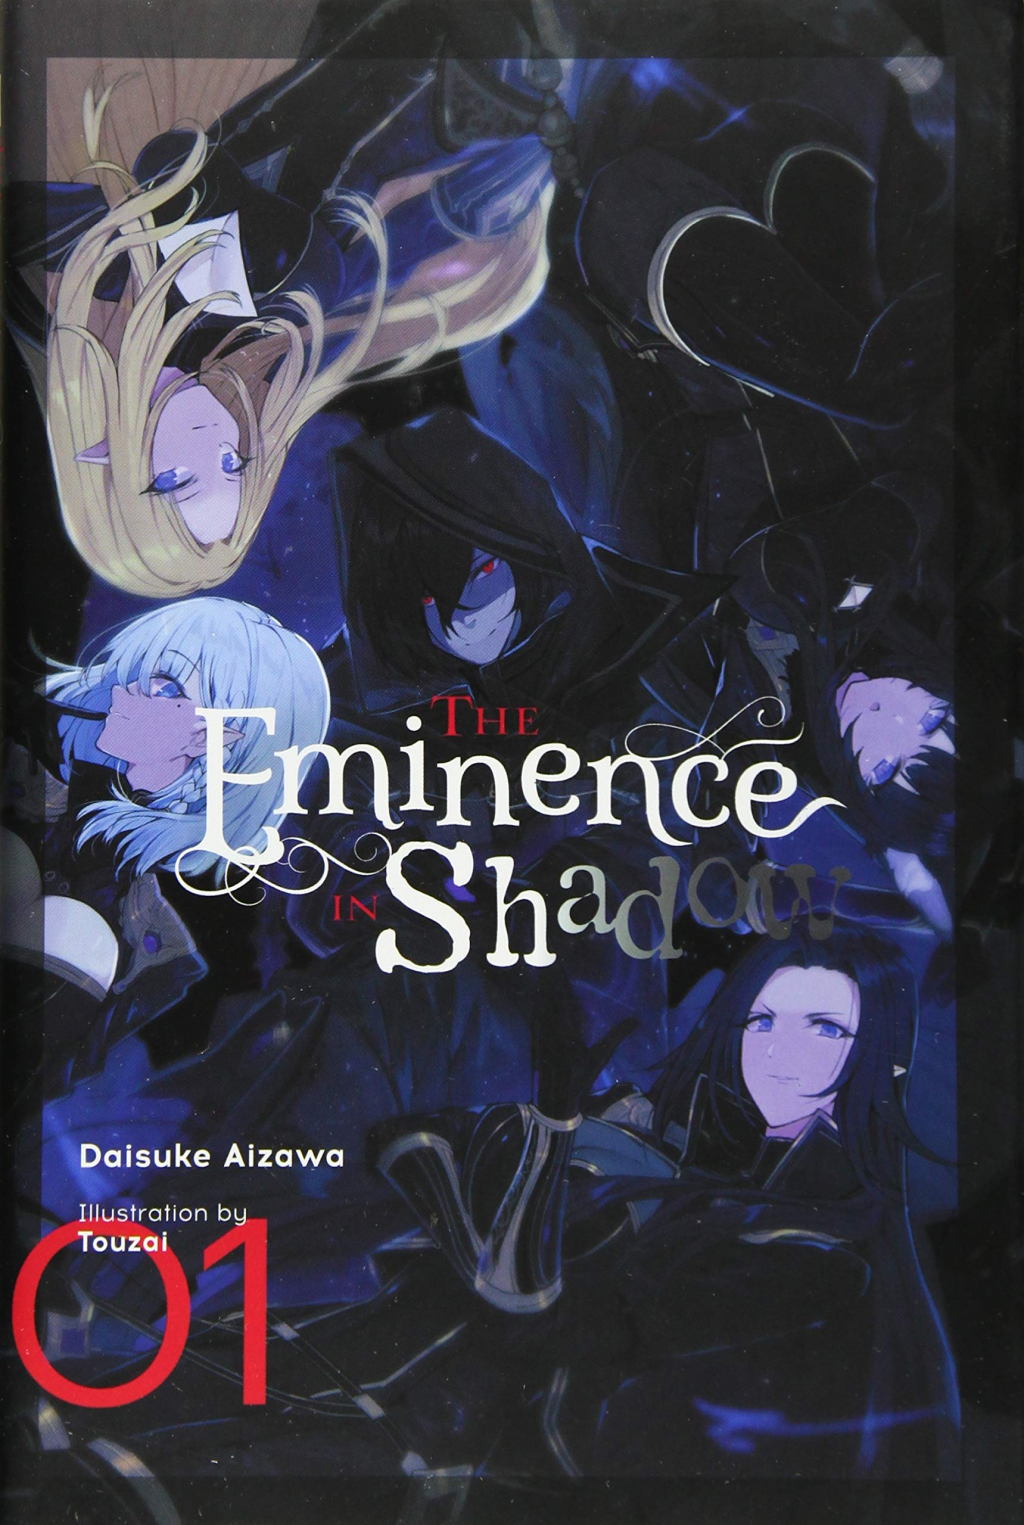 The Eminence in Shadow Airs For Two Consecutive Cours, 20 Episodes in Total